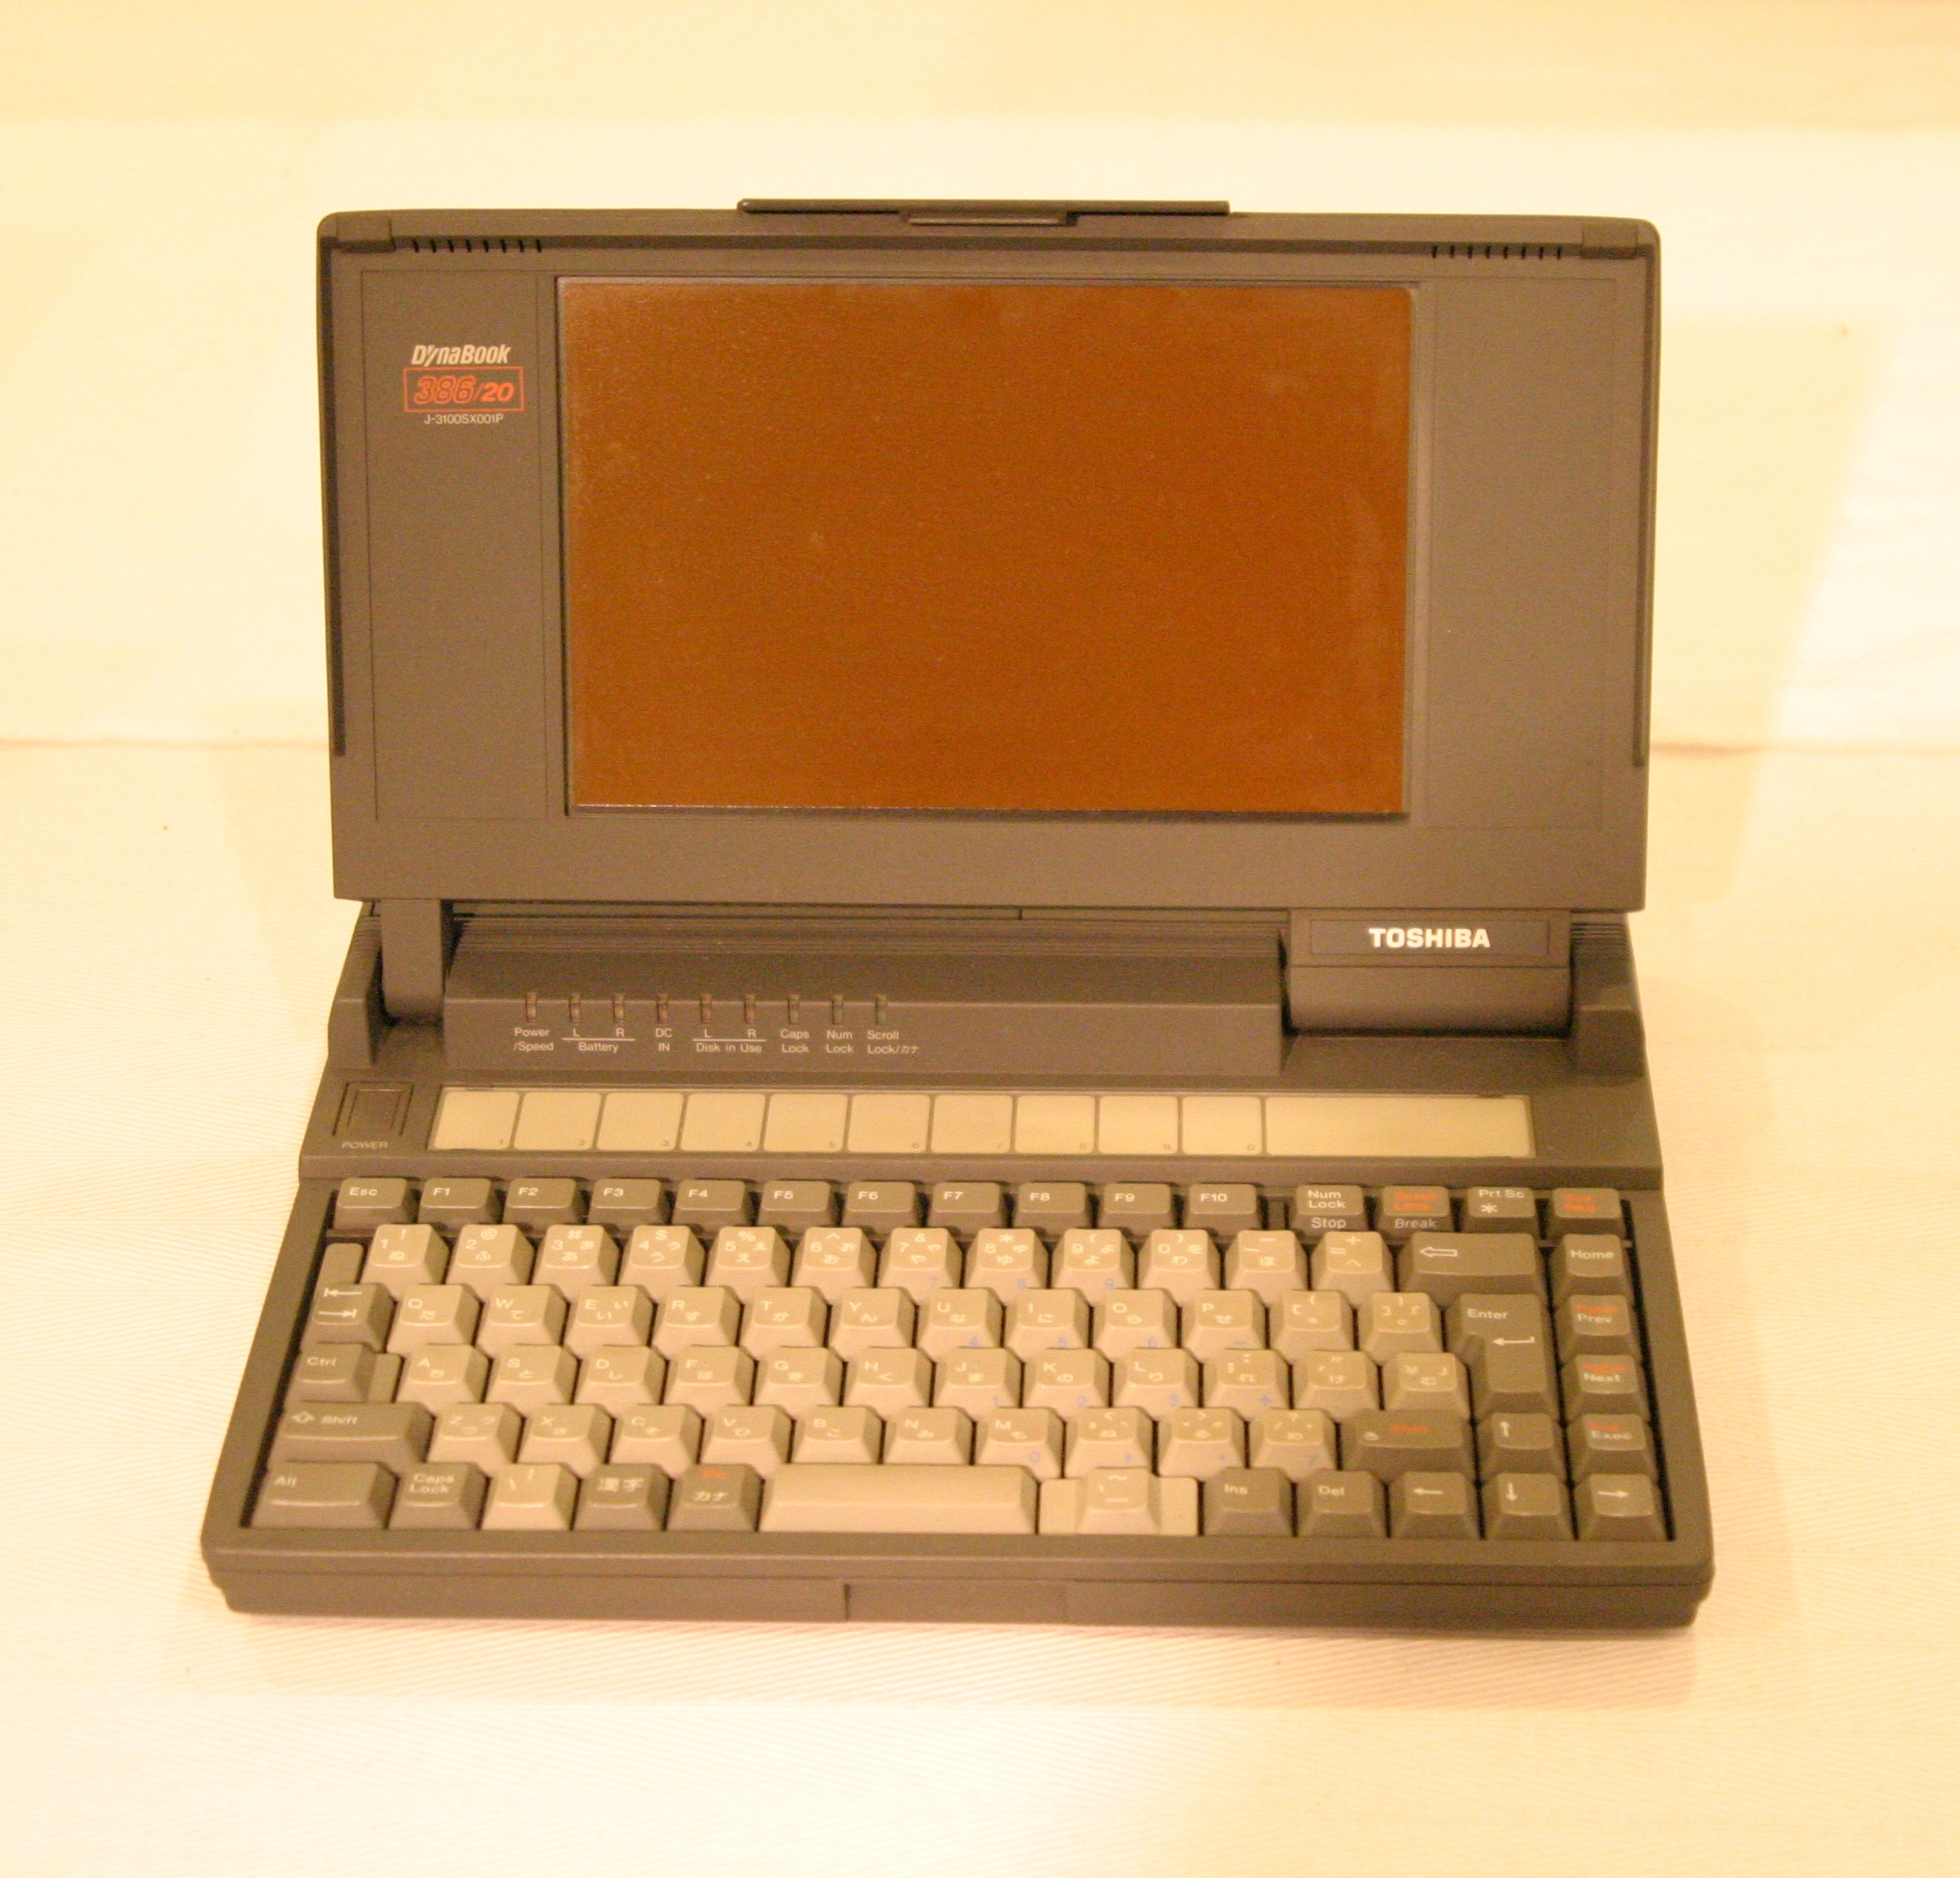 TOSHIBA | Personal Computers | KCG Computer Museum (Satellite of 